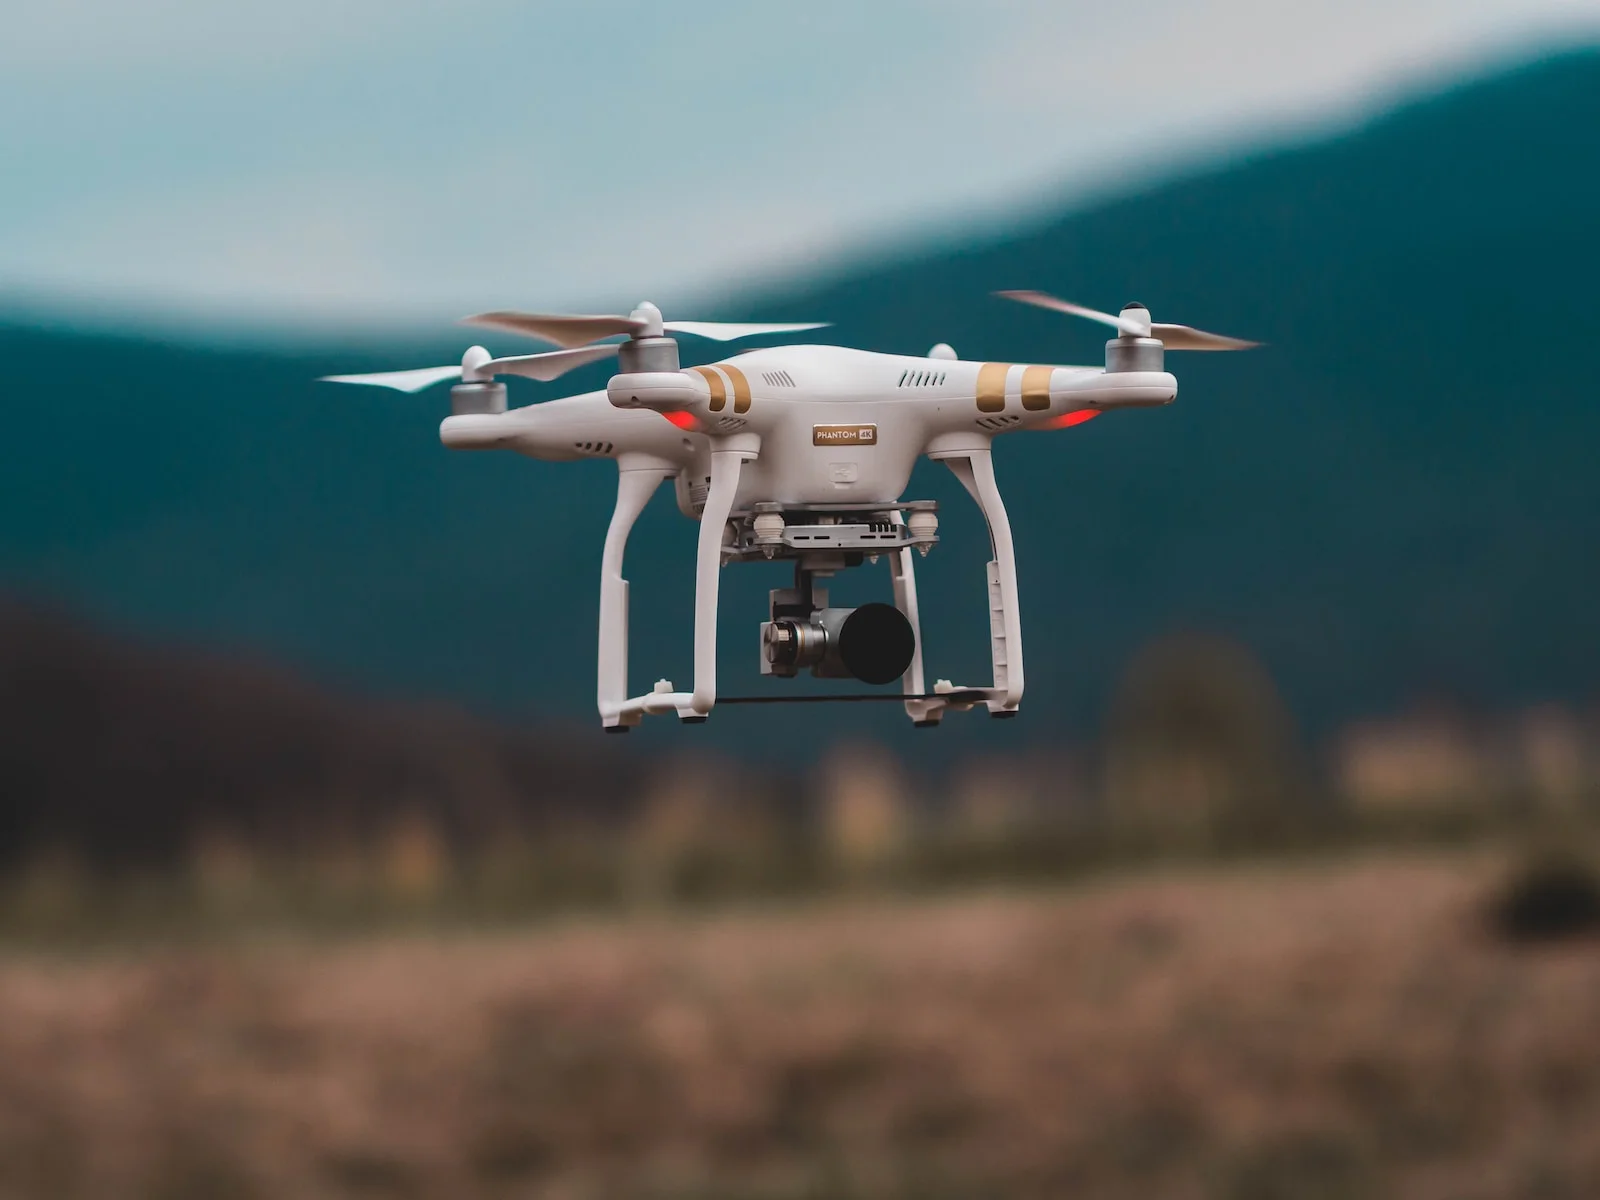 Discover leading PE & VC companies investing in the drone industry, including MavensWood Investment Ltd. and its portfolio company AerialBuz